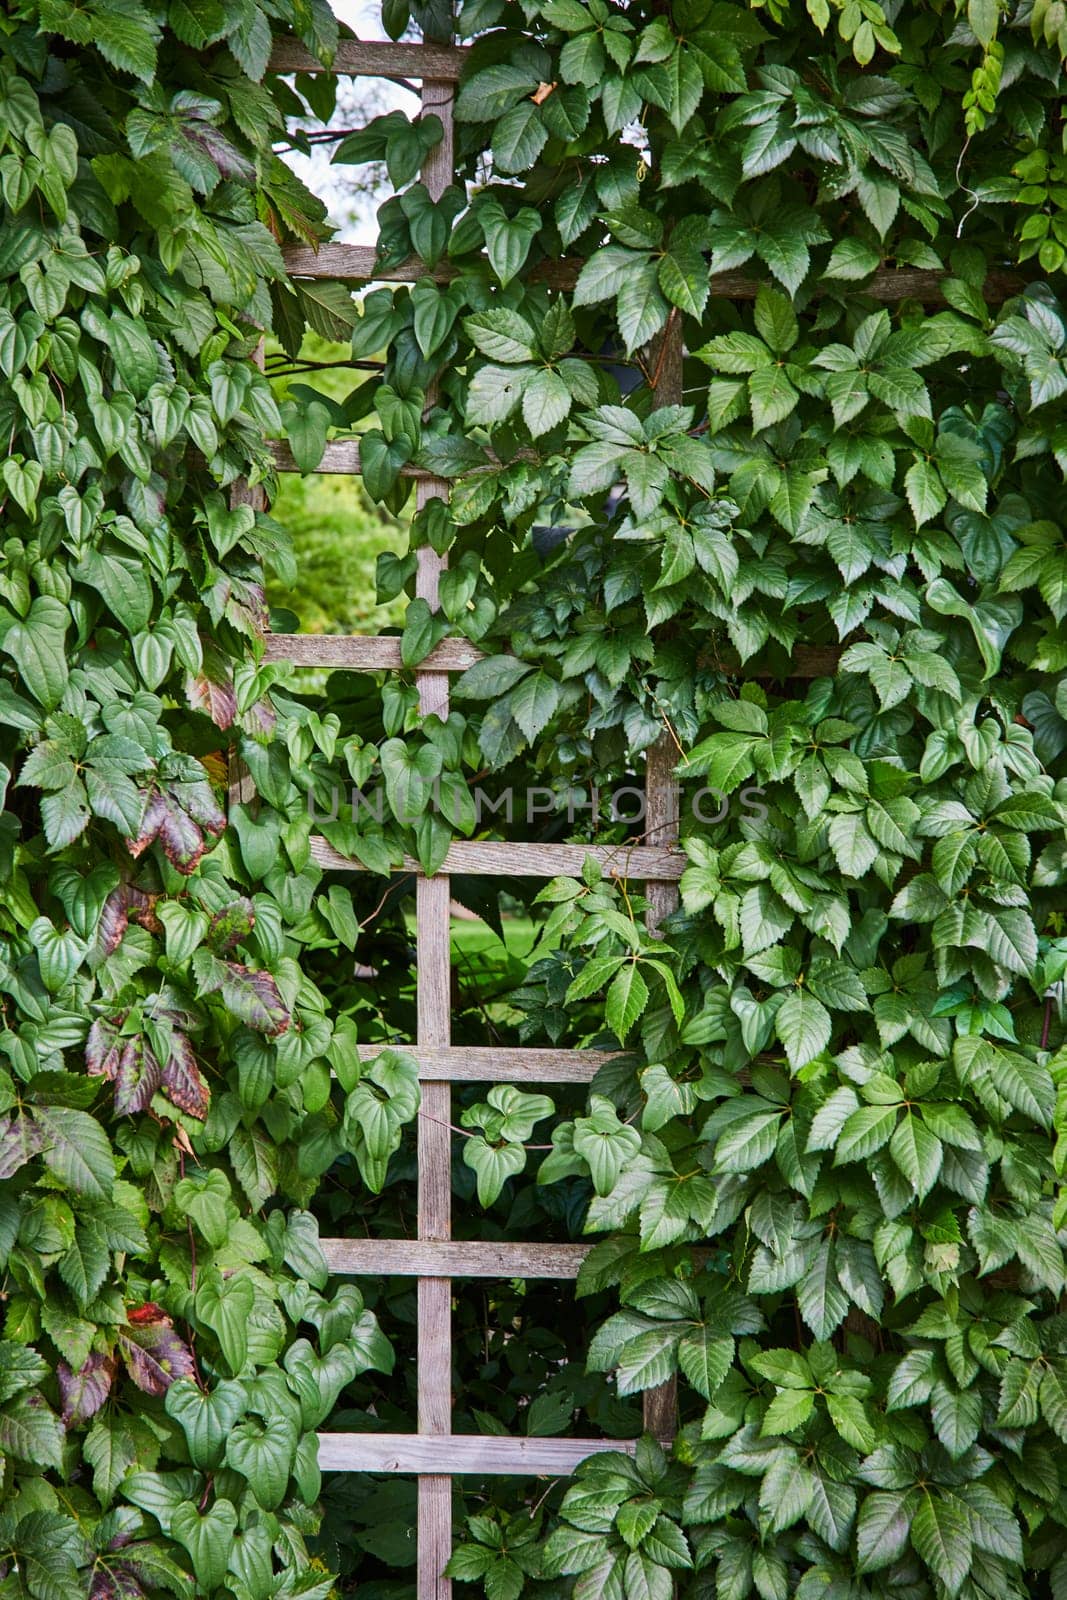 Rustic ladder entwined with lush ivy in Art Center garden, Indianapolis, symbolizing growth and harmony in nature.